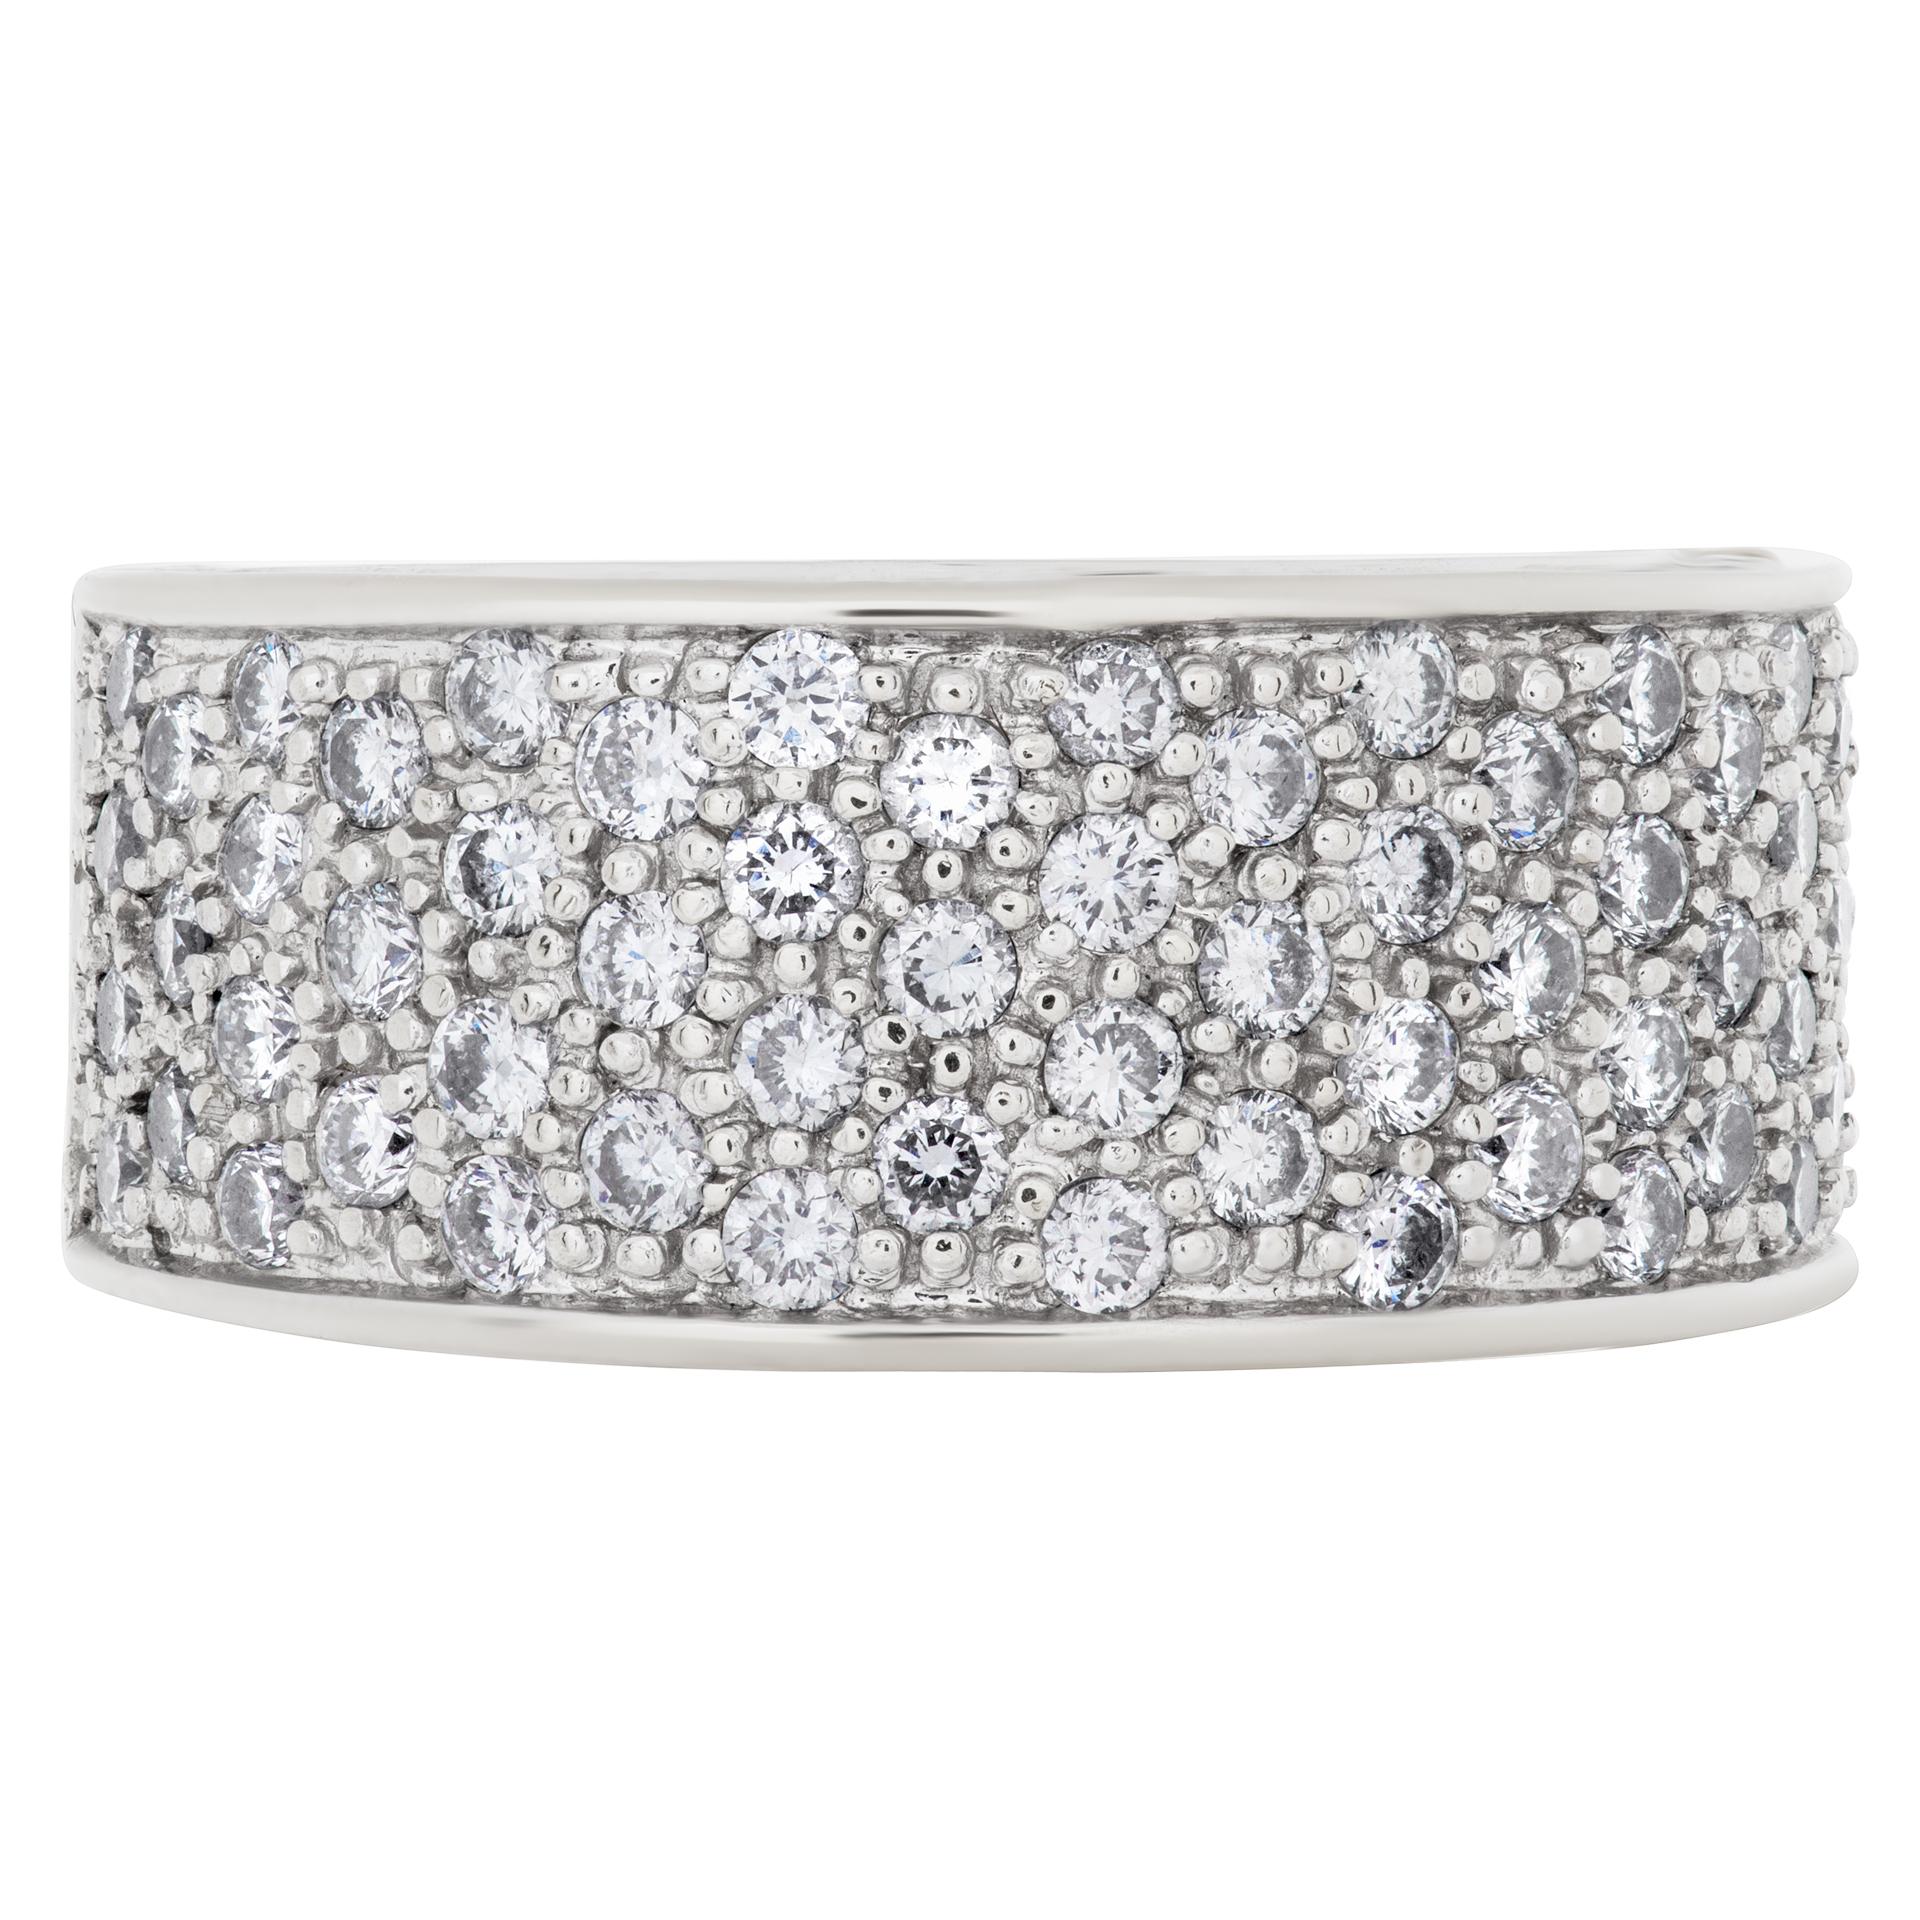 Elegant thick & diamond eternity band in 18k white gold with over 1 carats G-H color, VS-SI clarity  diamonds. Size 5.5<br /><br />This Diamond ring is currently size 5.25 and some items can be sized up or down, please ask! It weighs 7.3